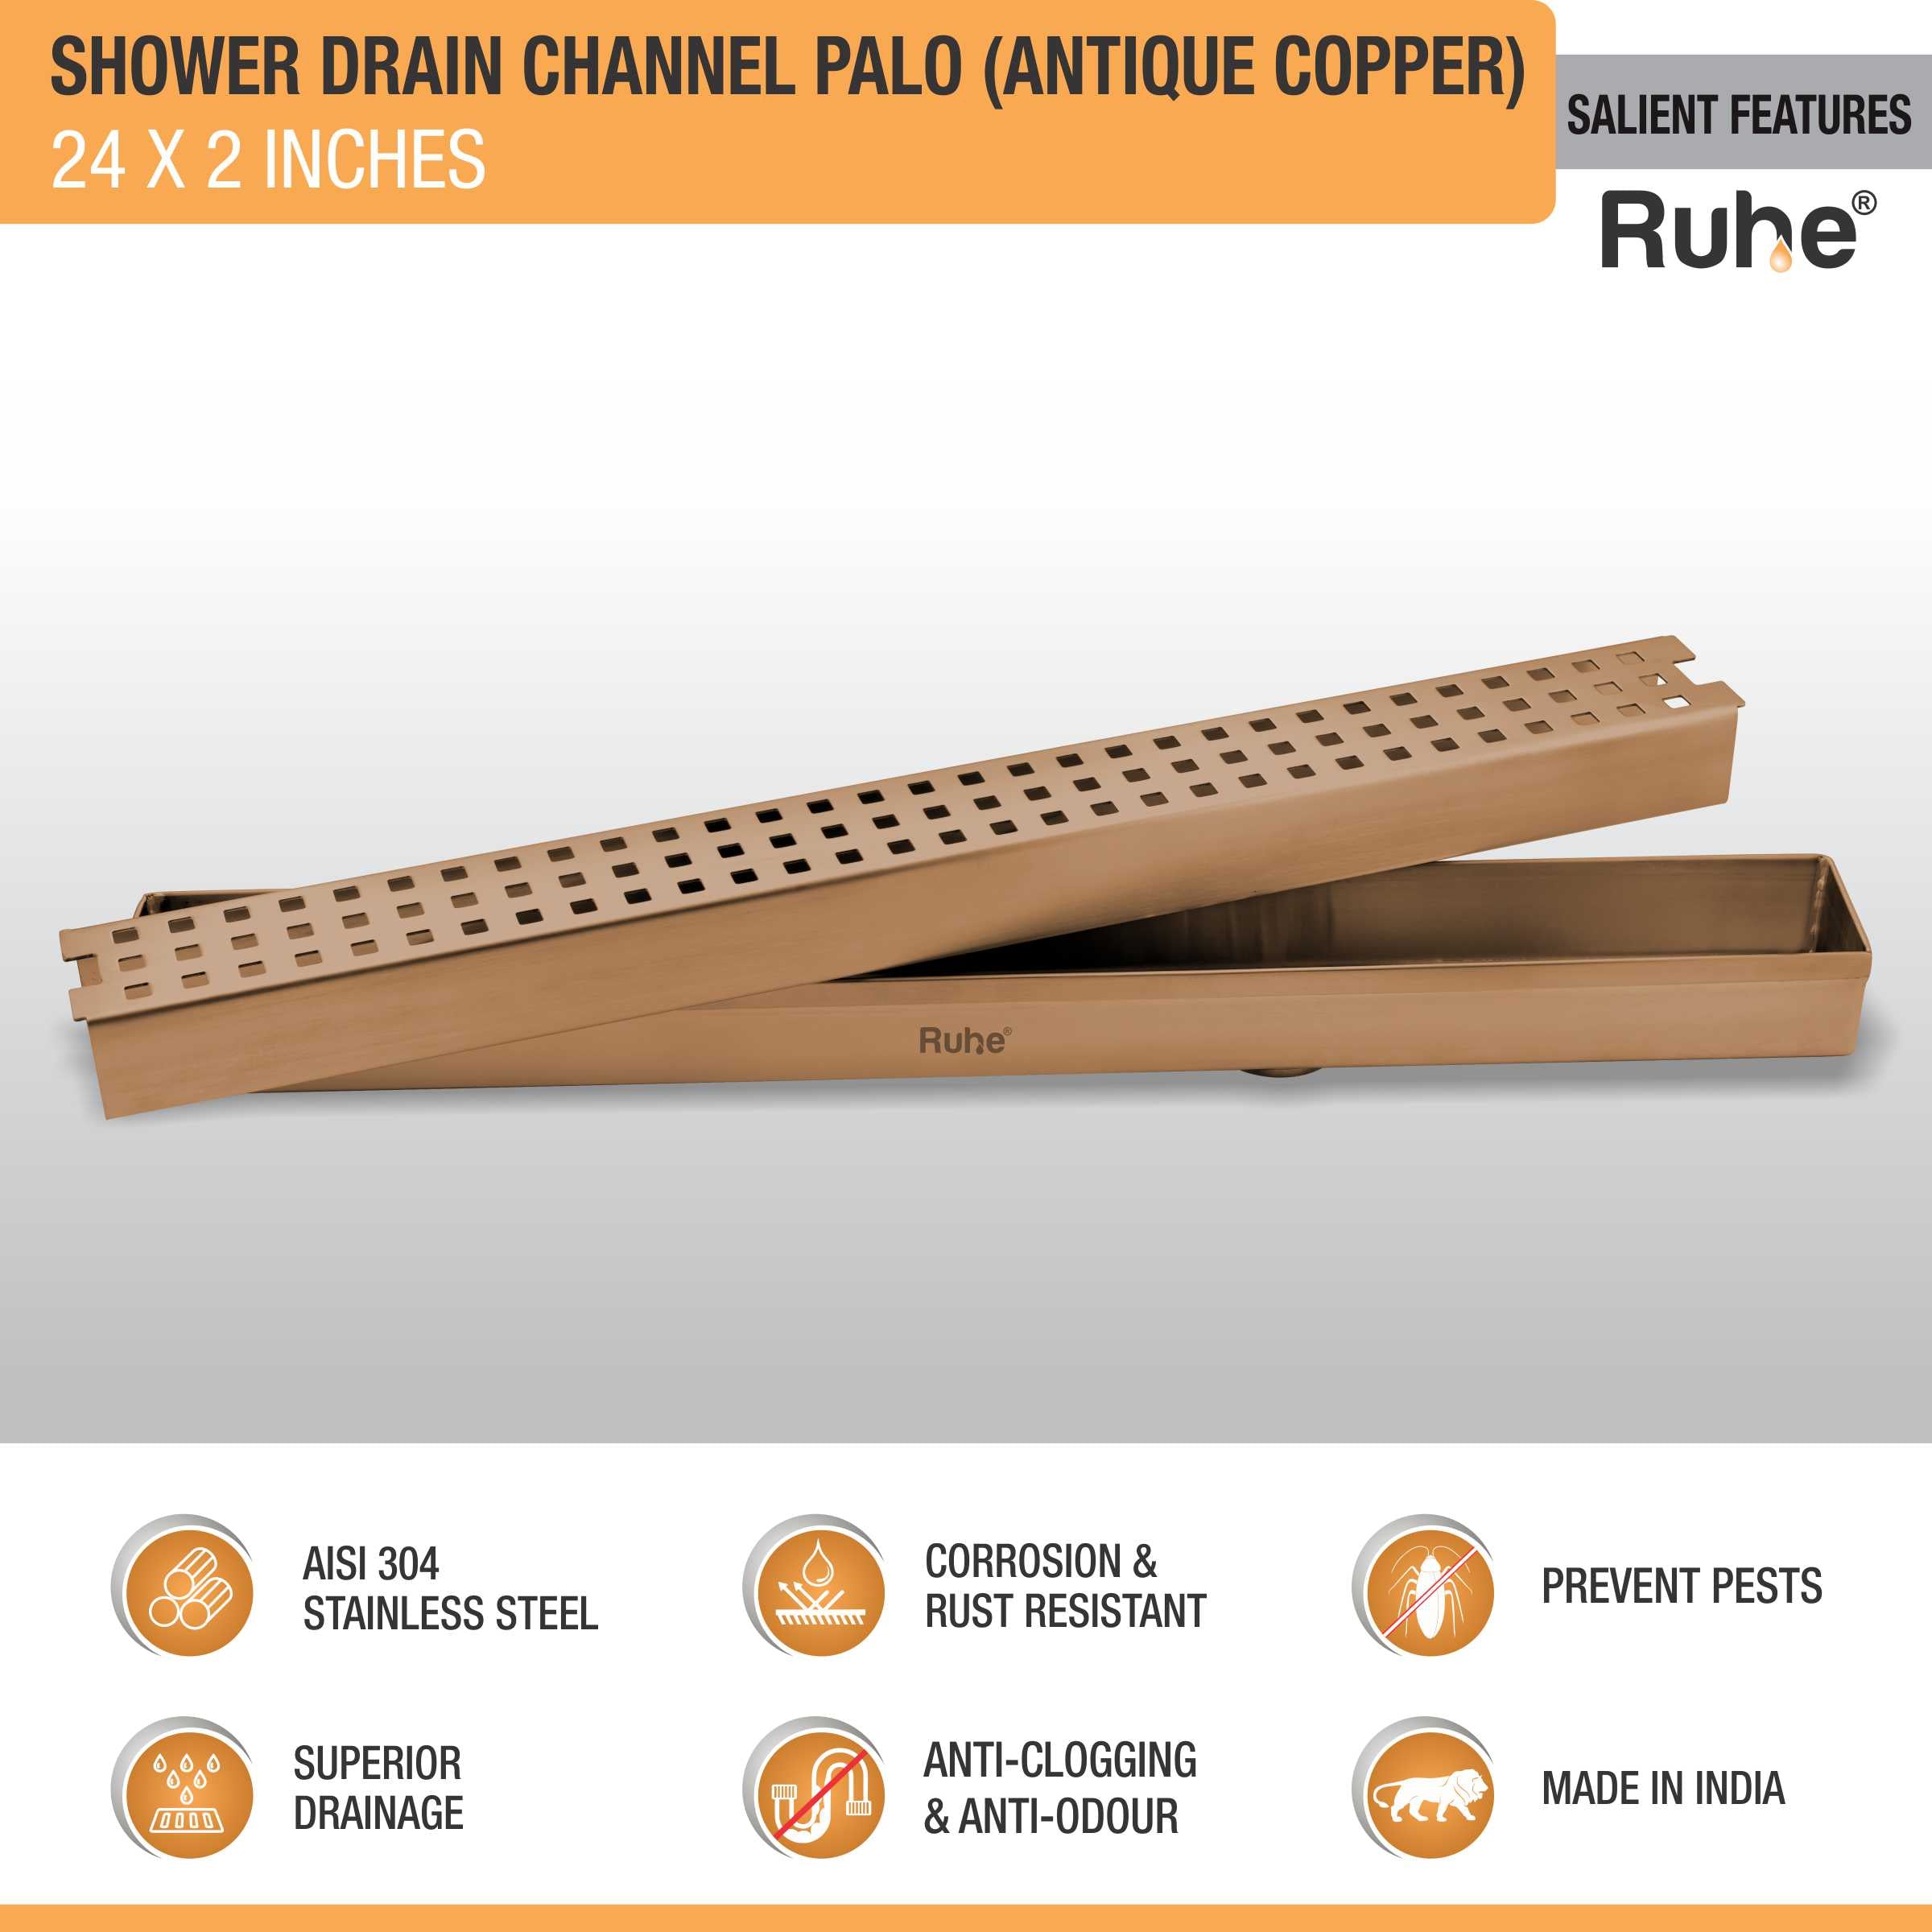 Palo Shower Drain Channel (24 x 2 Inches) ROSE GOLD/ANTIQUE COPPER features